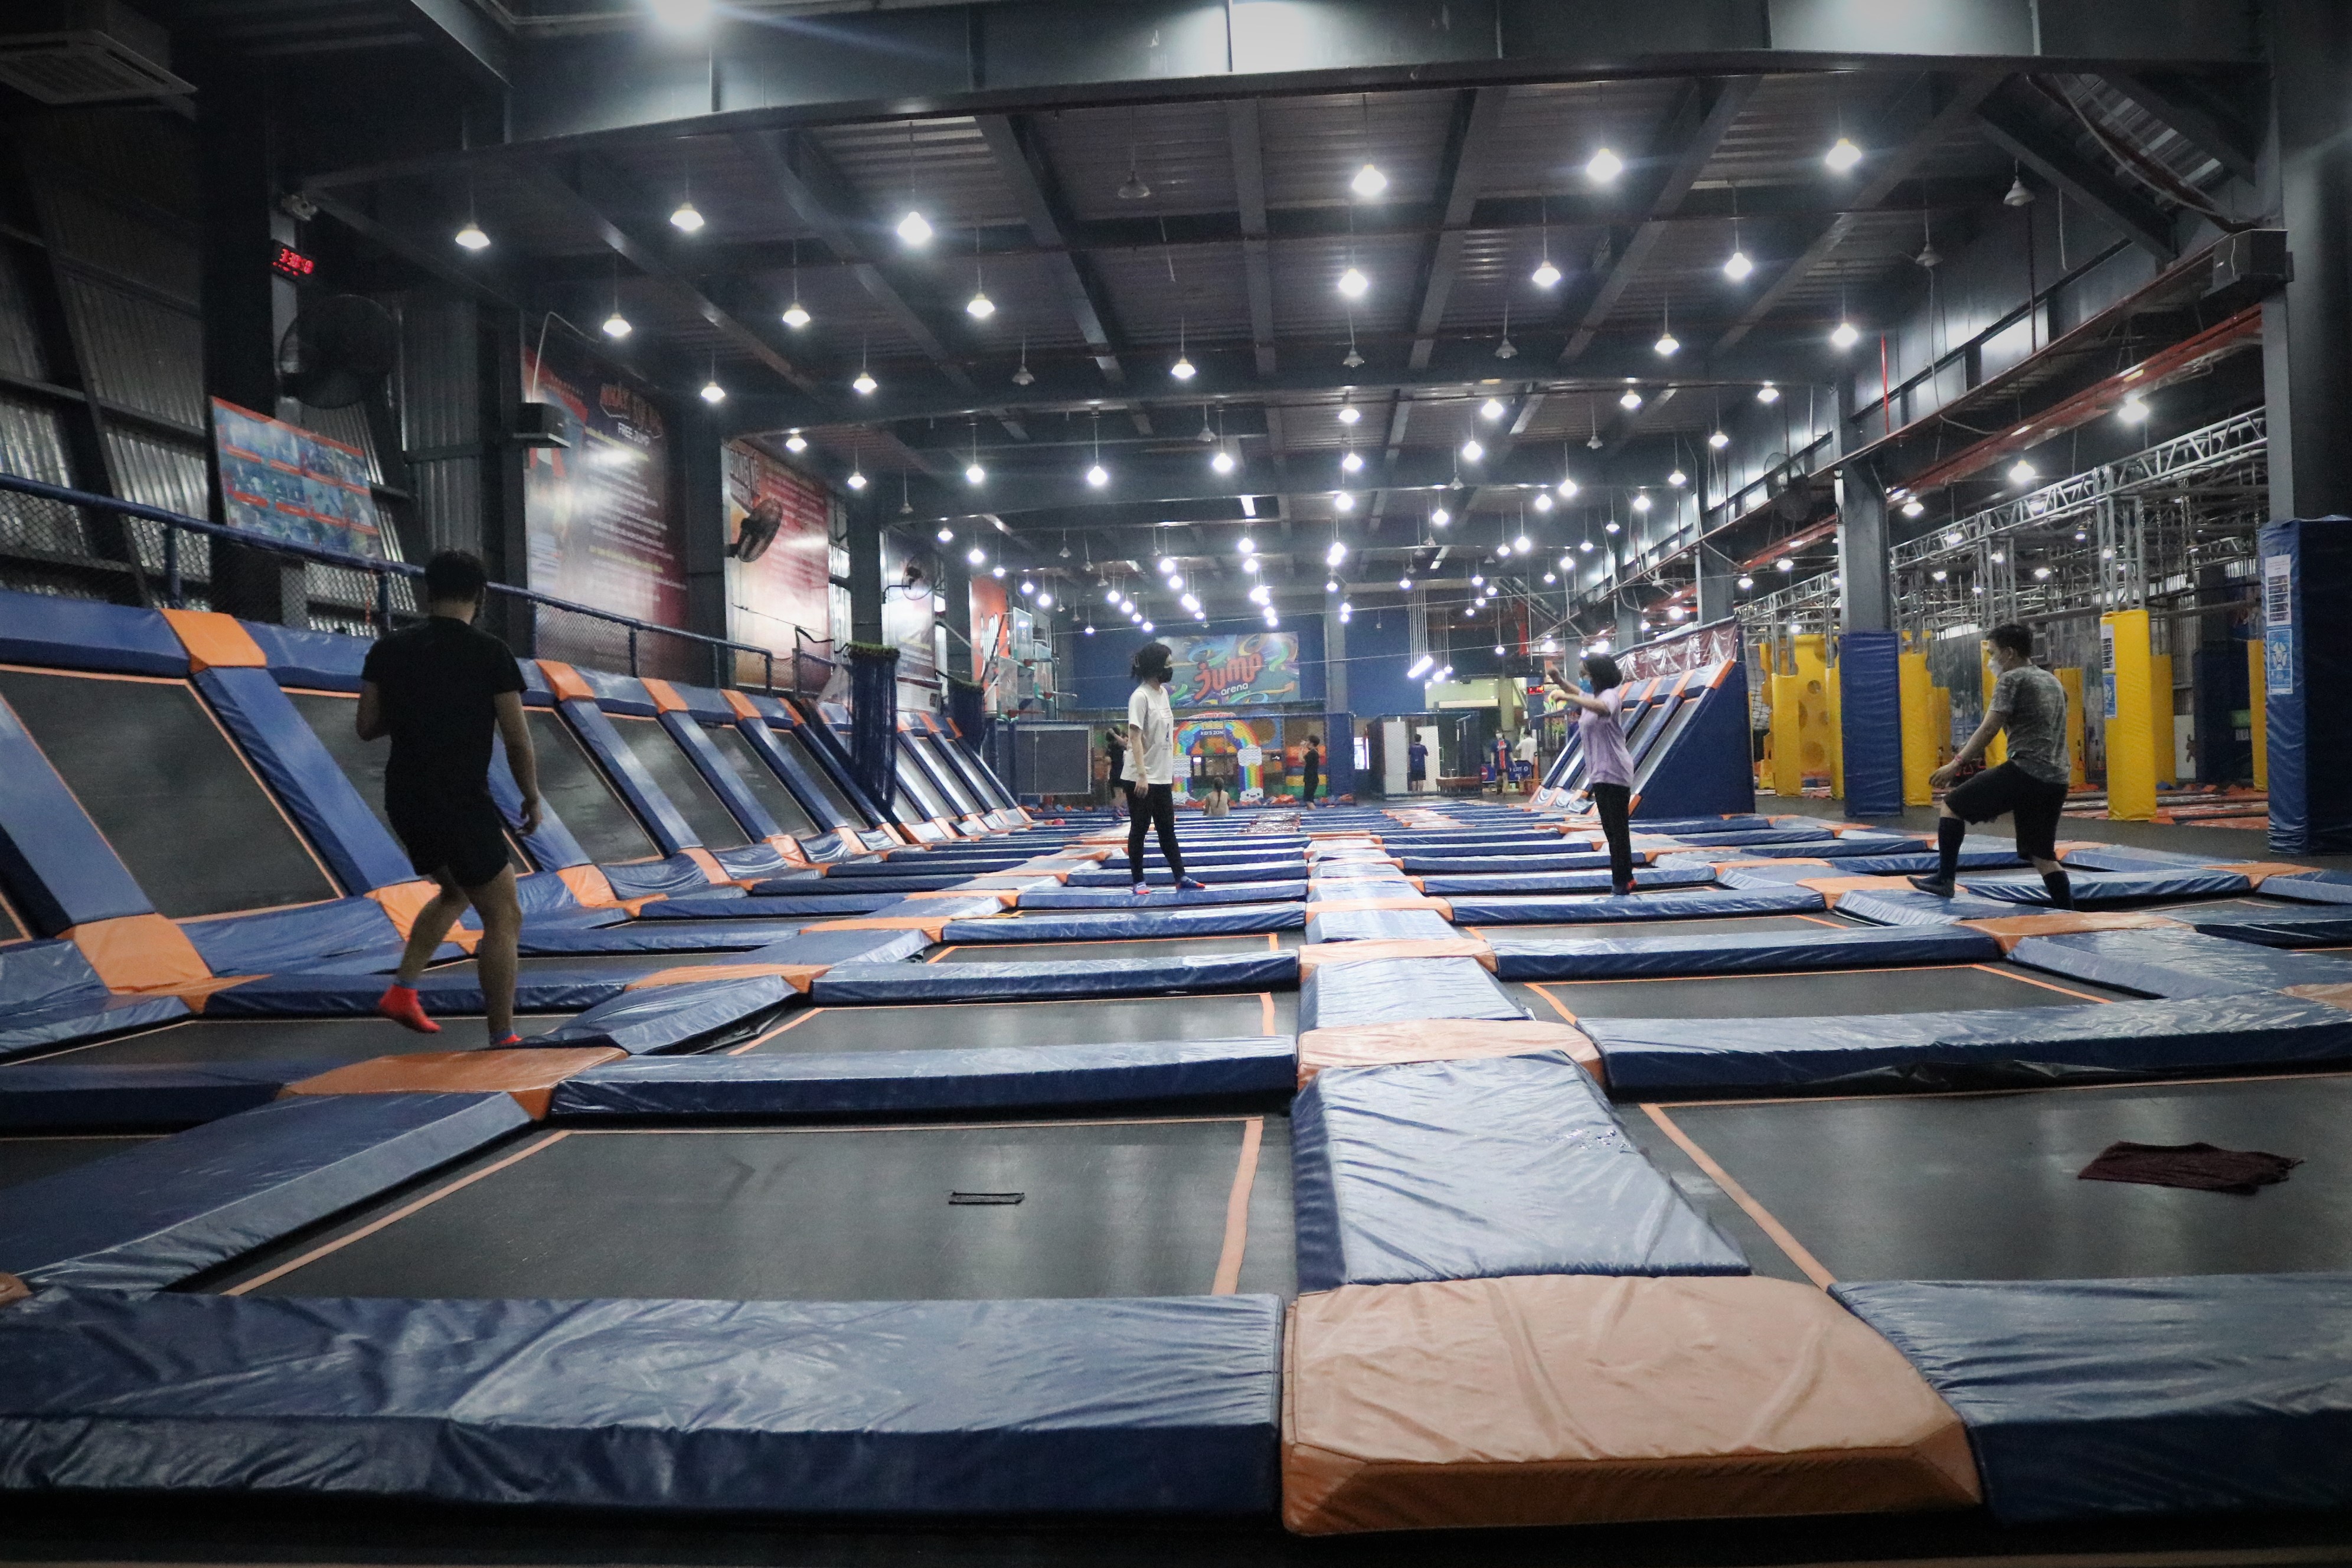 Bounce the day away at Ho Chi Minh City’s indoor trampoline park